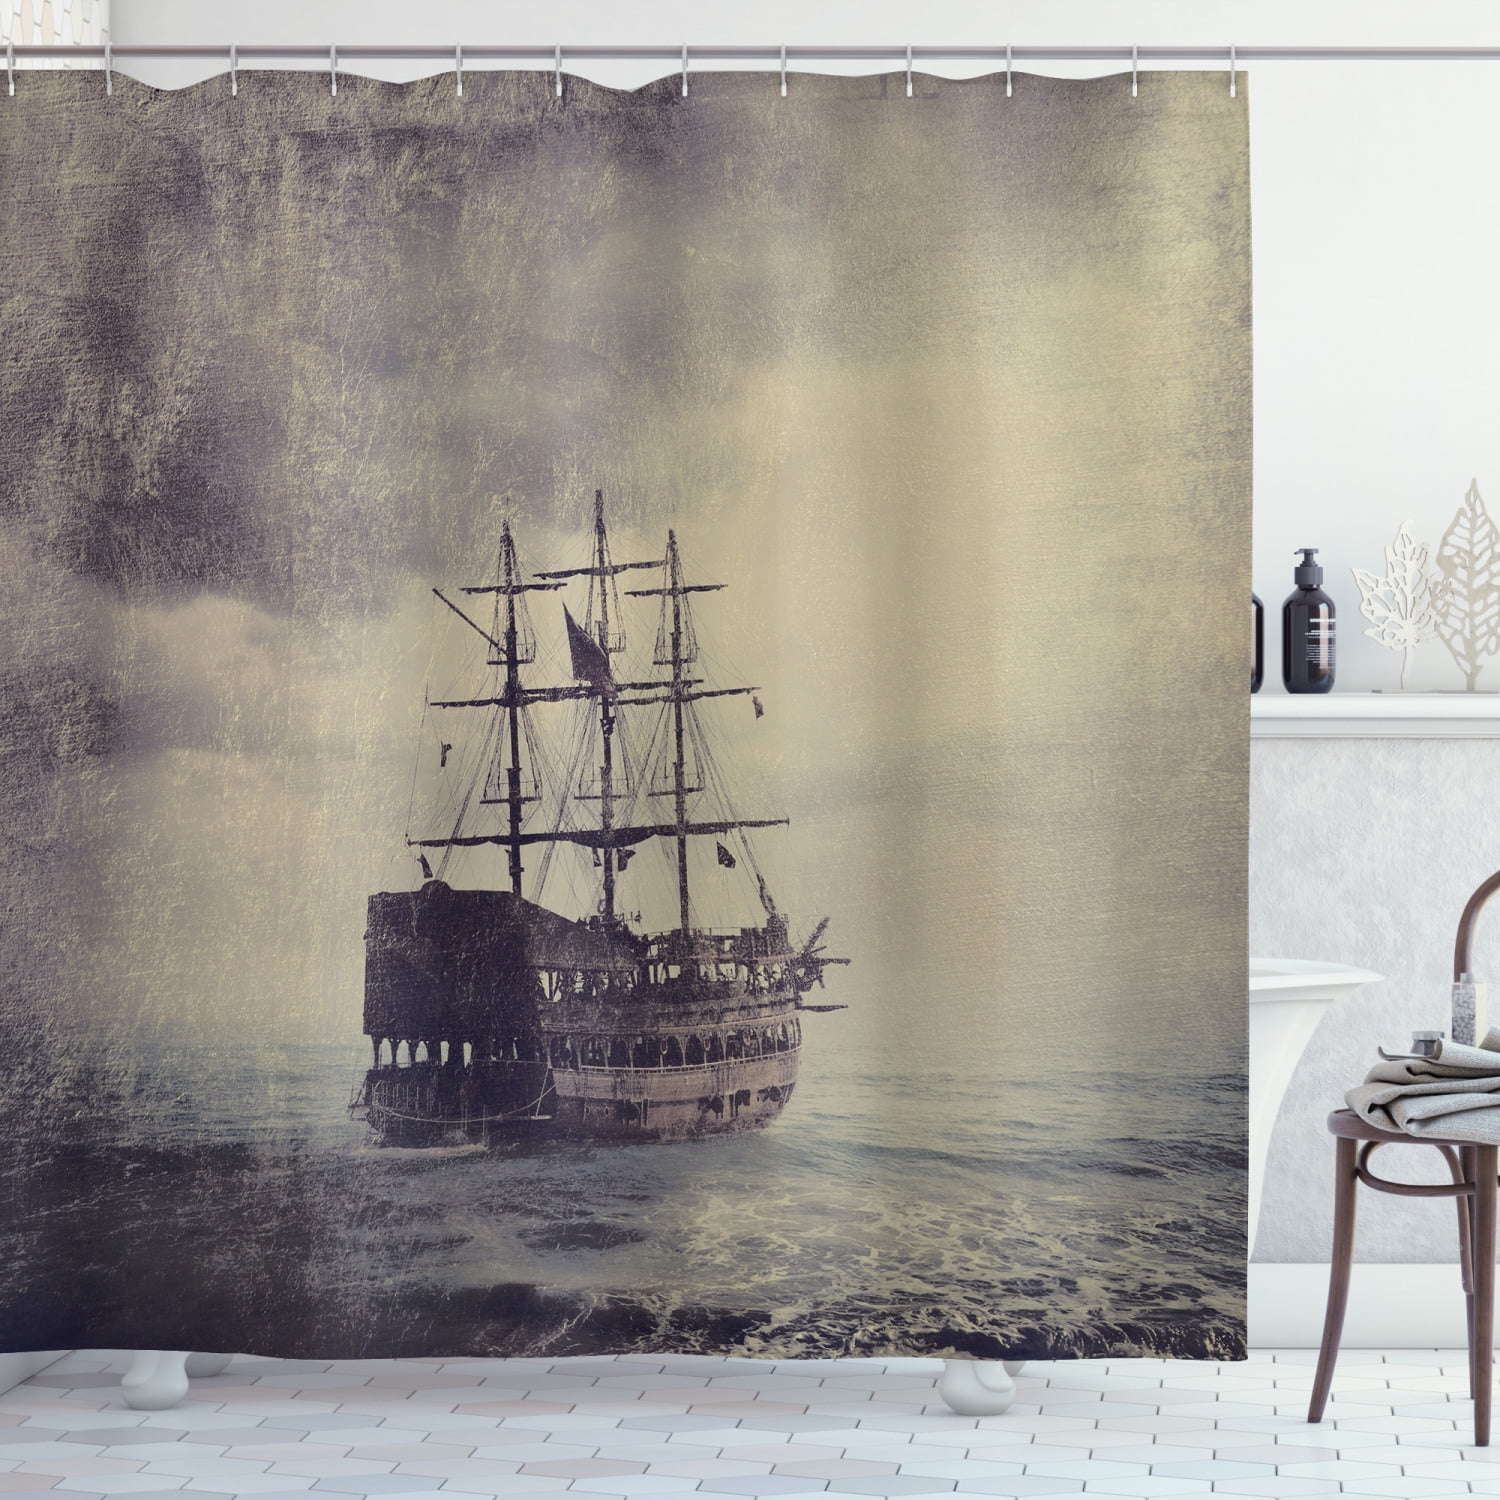 Waterproof Fabric Shower Curtain Set Oil Painting Style High Seas Pirate Ship